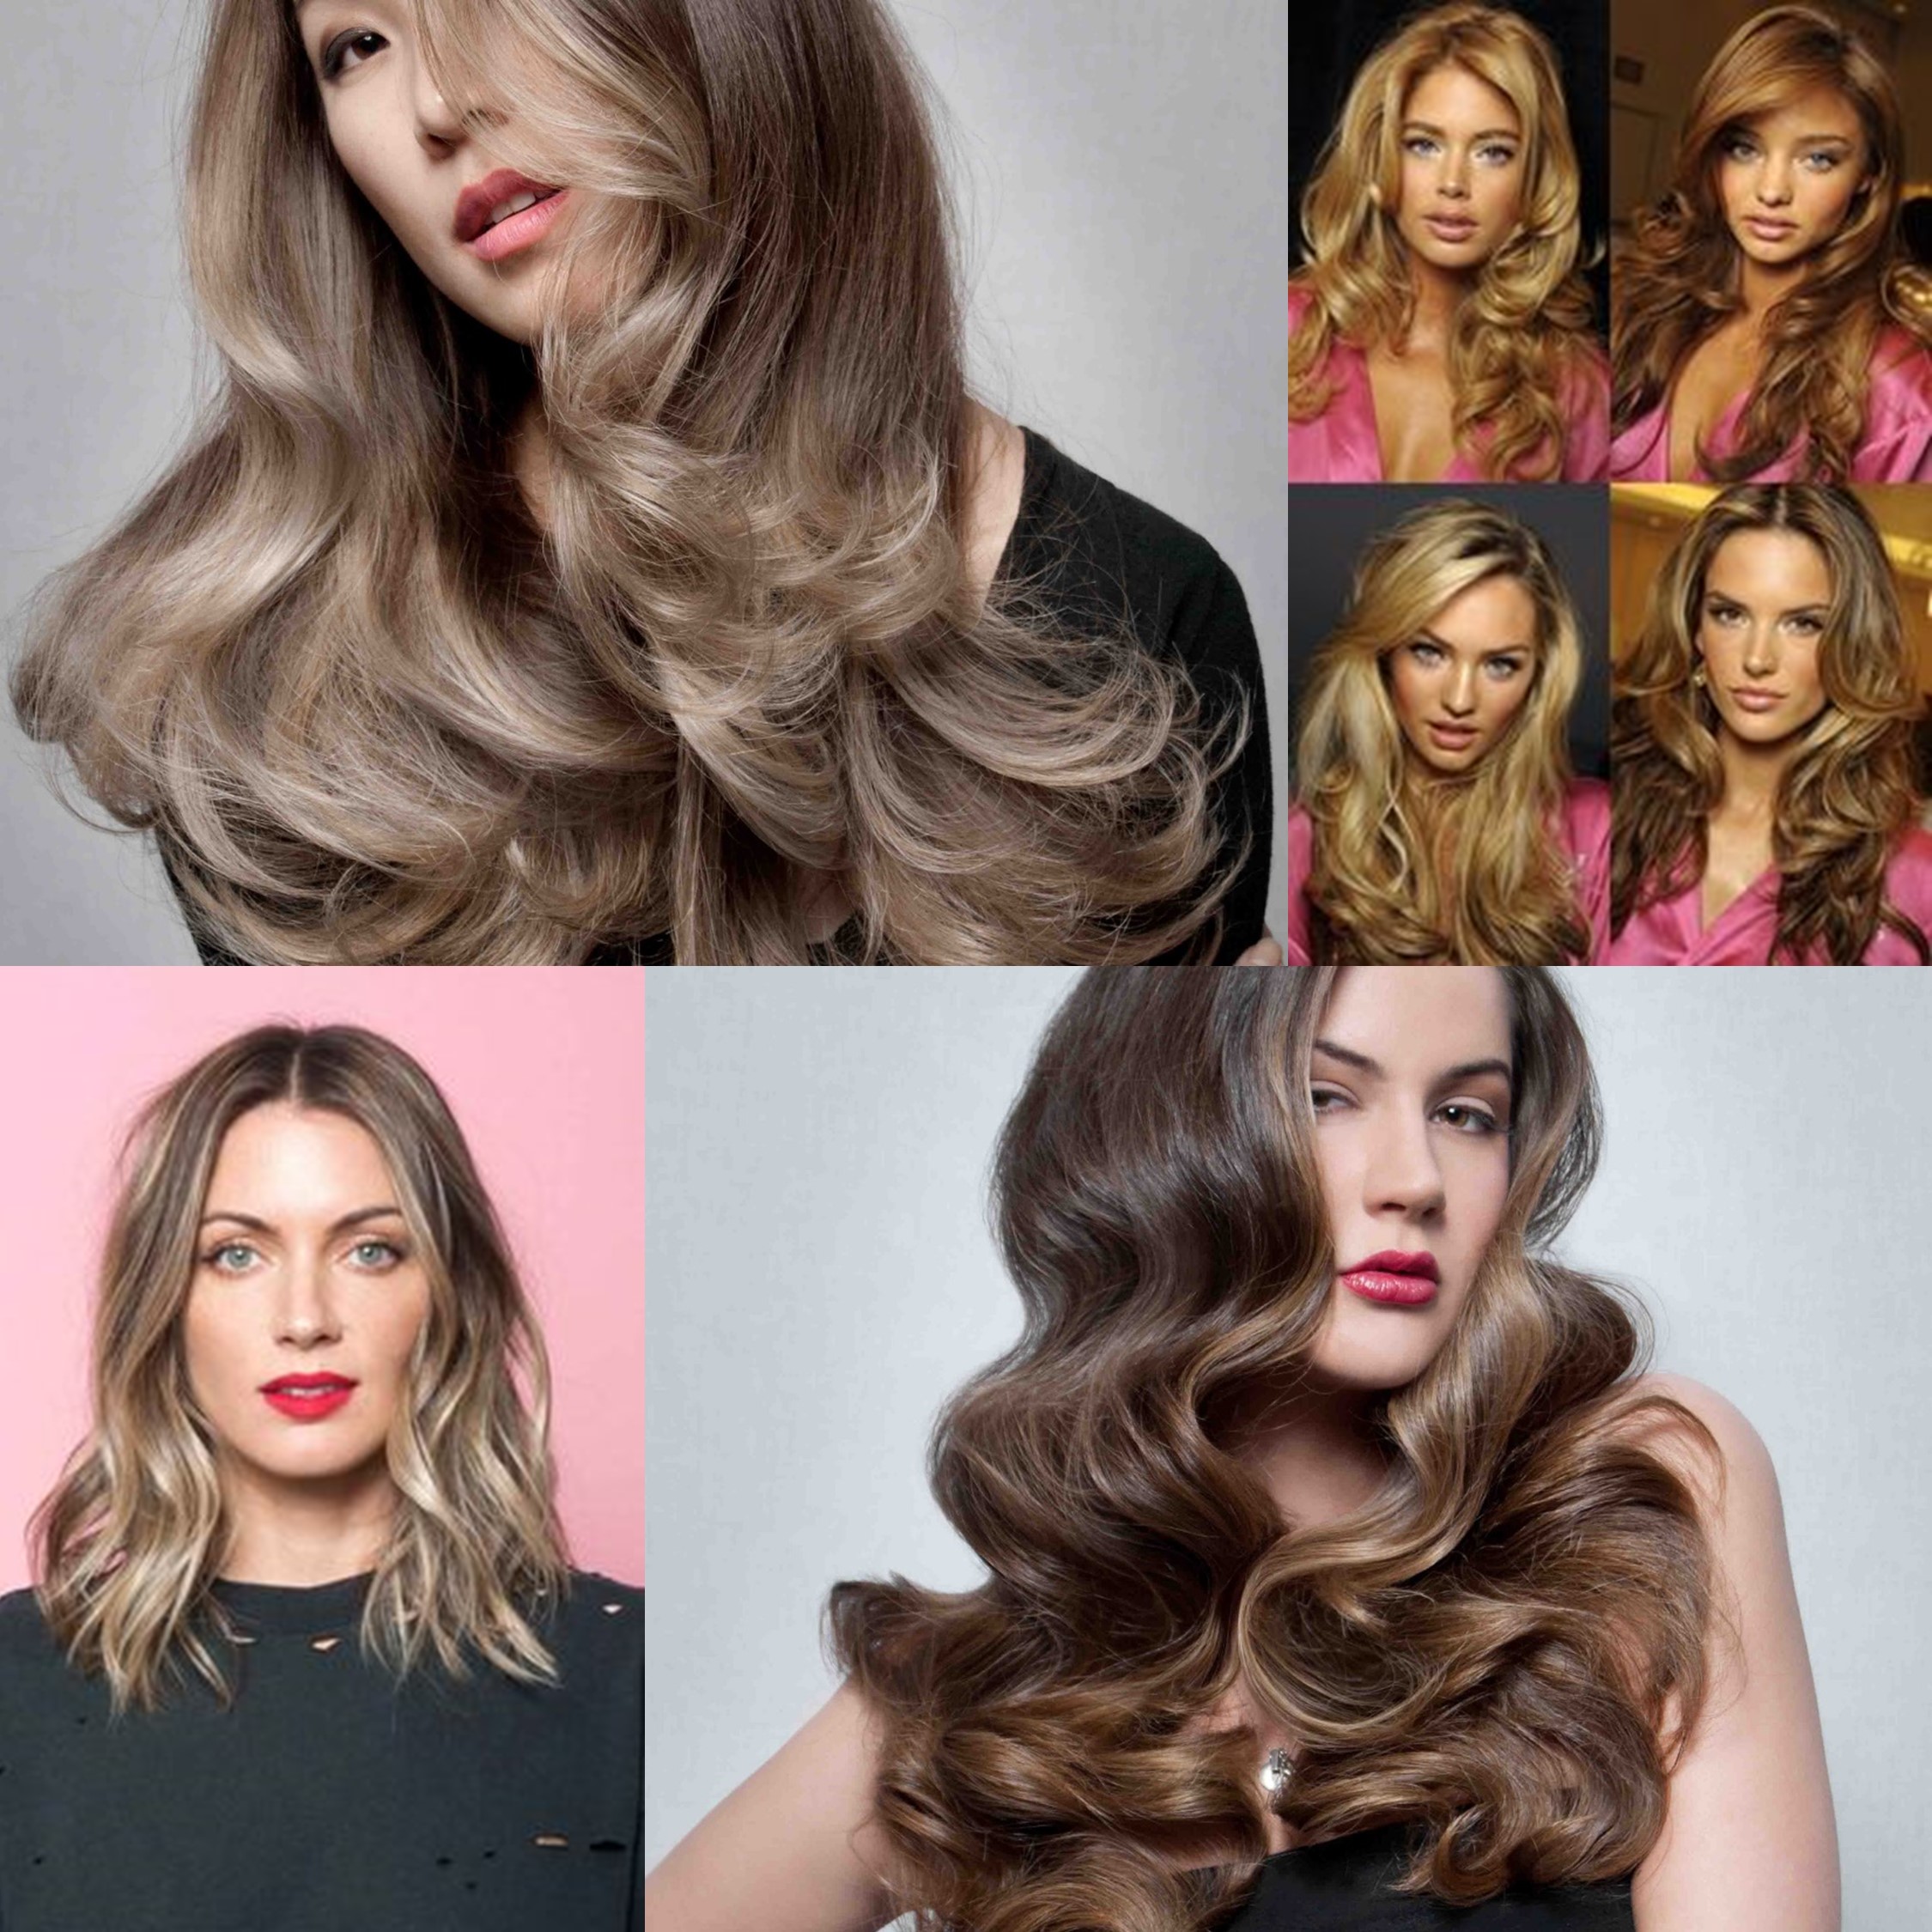 Next time when you see models or celebrities with Balayaged, Bleached or Highlighted curls, remember, these are created via heat-styling, not chemical perm.